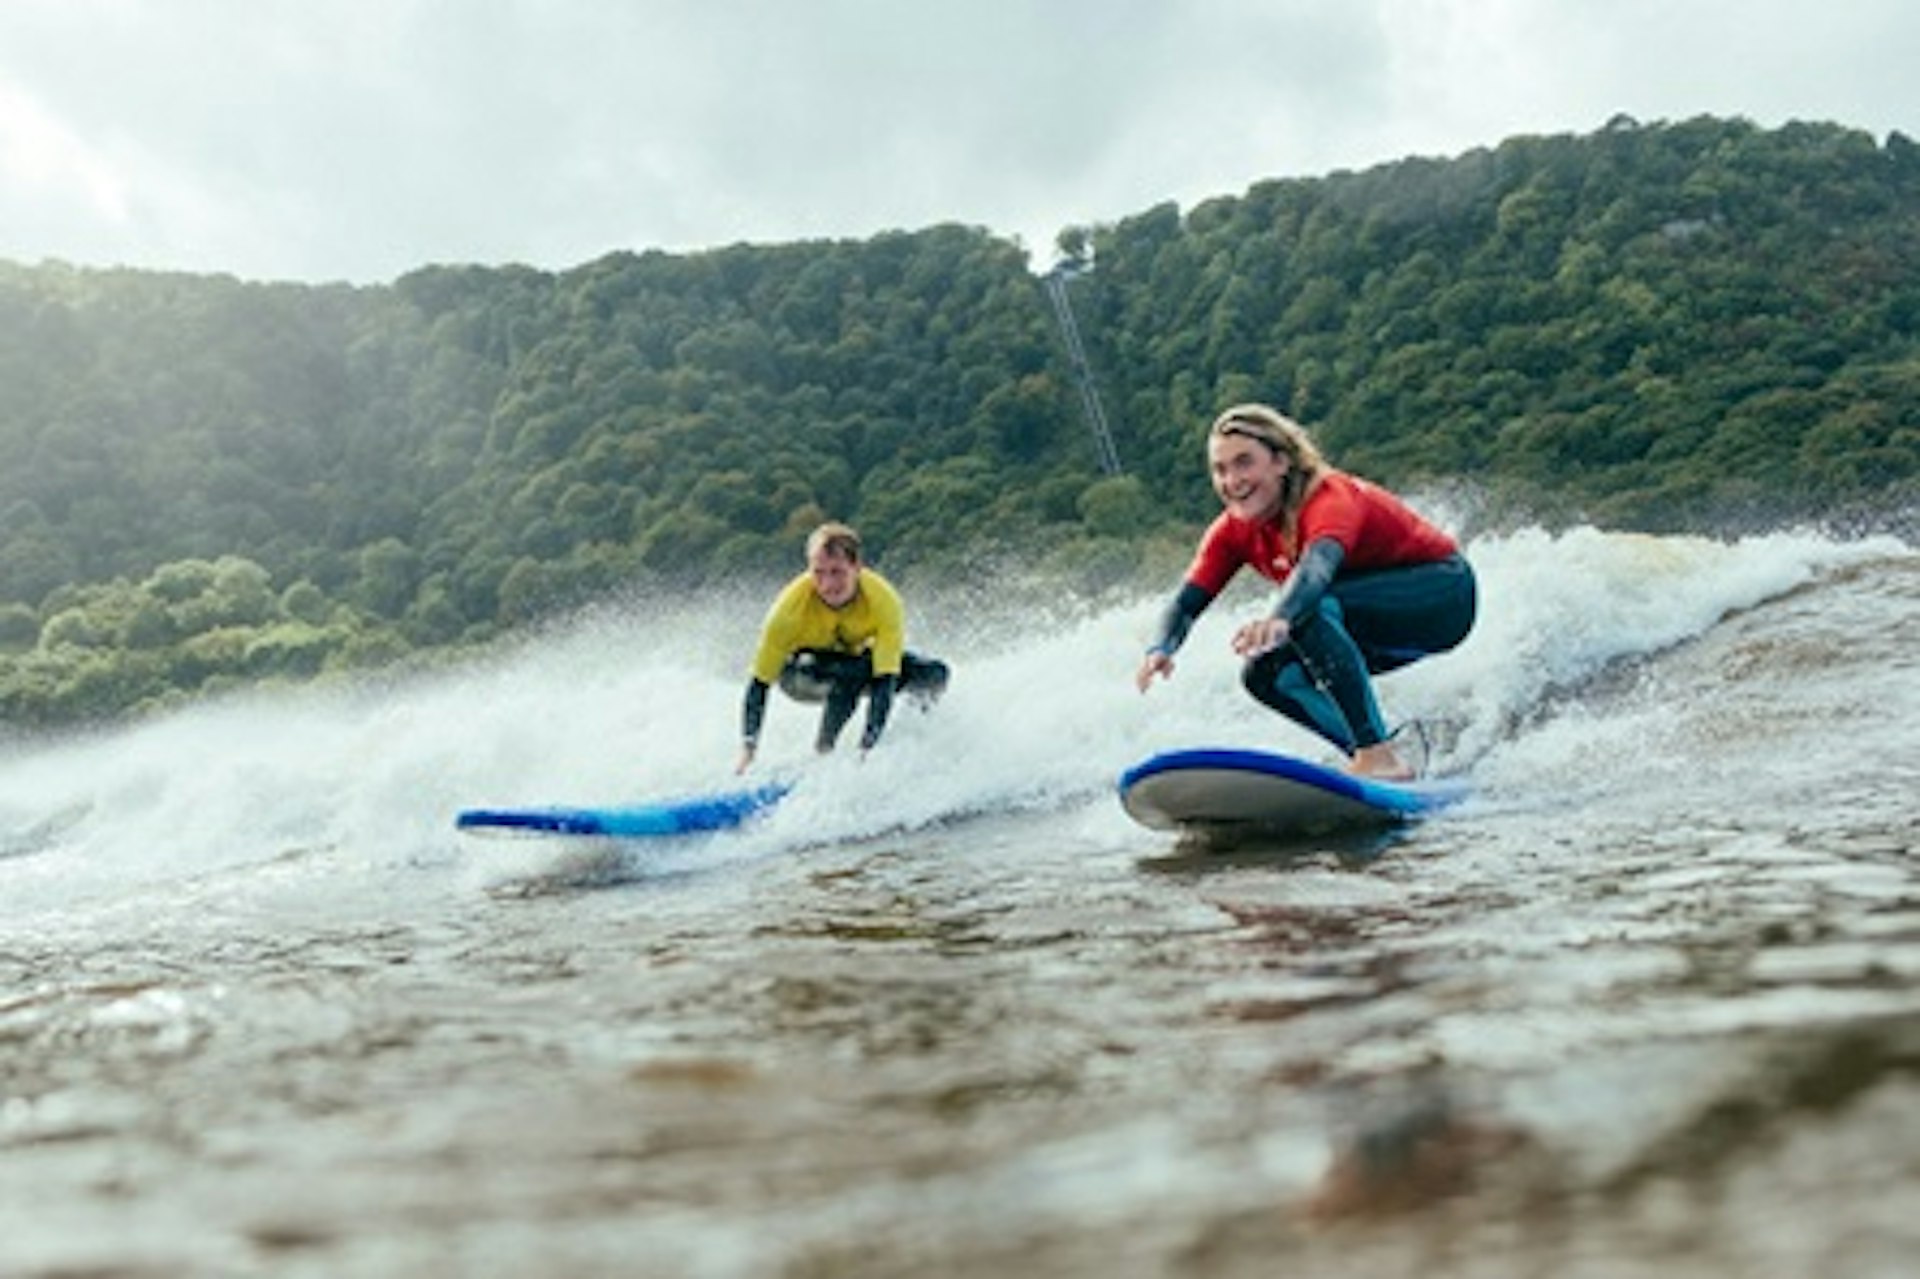 Beginner Surf Lesson for Two at Adventure Parc Snowdonia 2